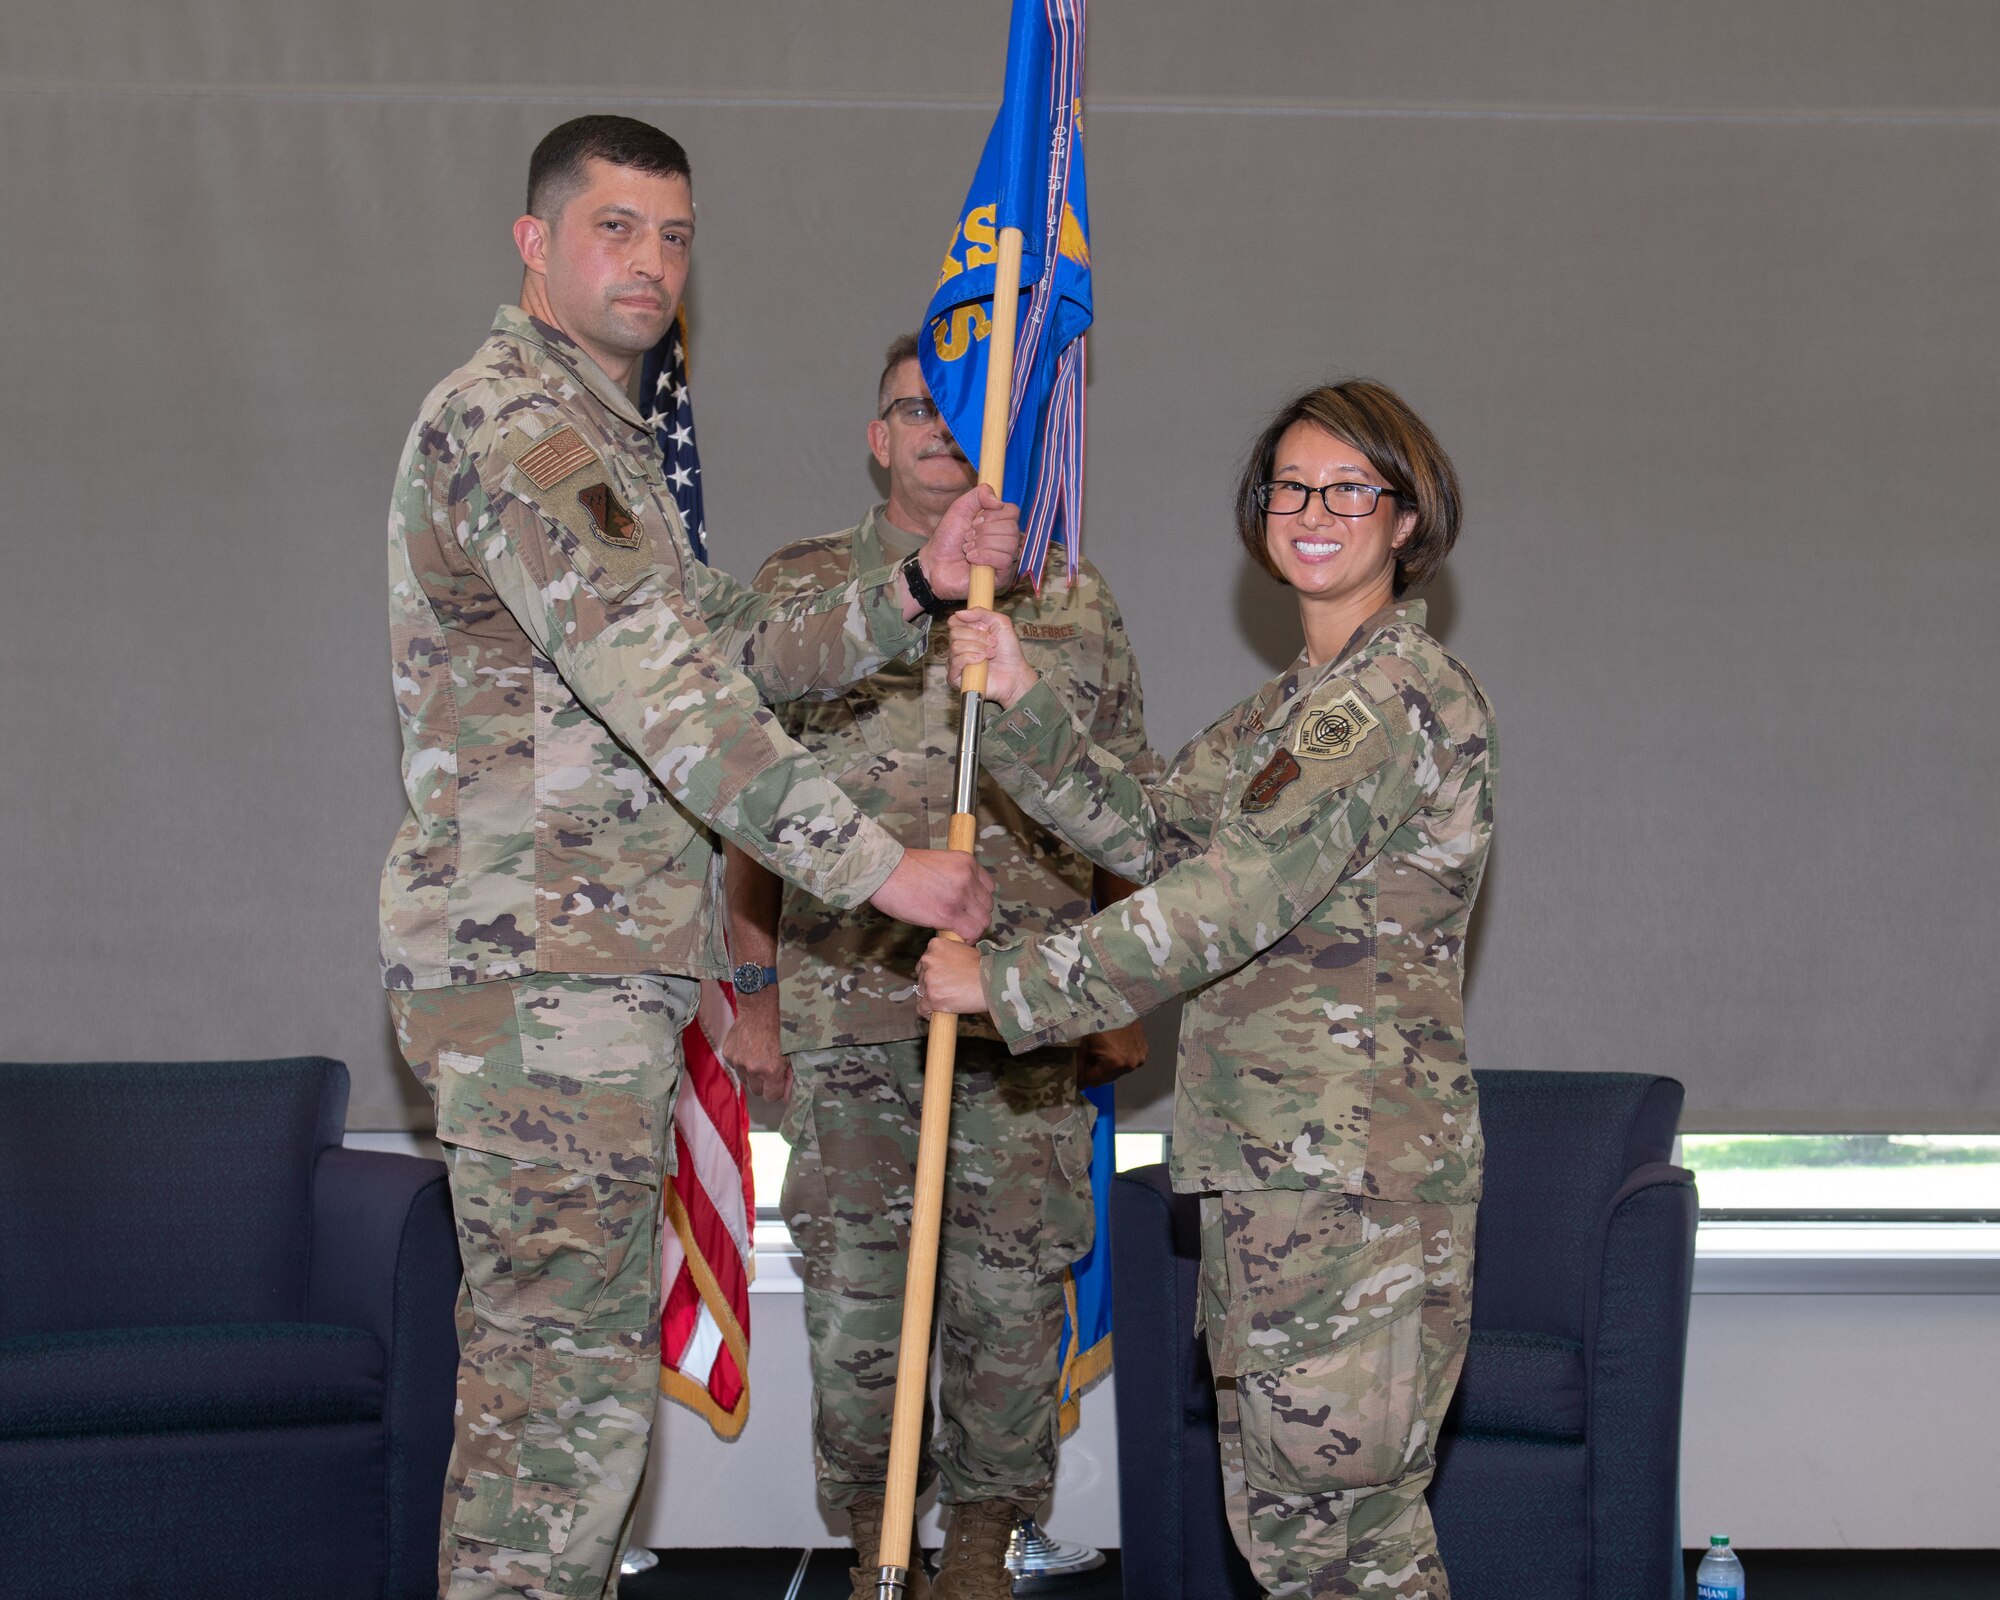 The 192nd Maintenance Squadron holds an assumption of command ceremony July 11, 2021, at Joint Base Langley-Eustis, Virginia. Lt. Col. Elim H. Sniady assumed command of the squadron after serving as Air National Guard Combat Forces advisor.